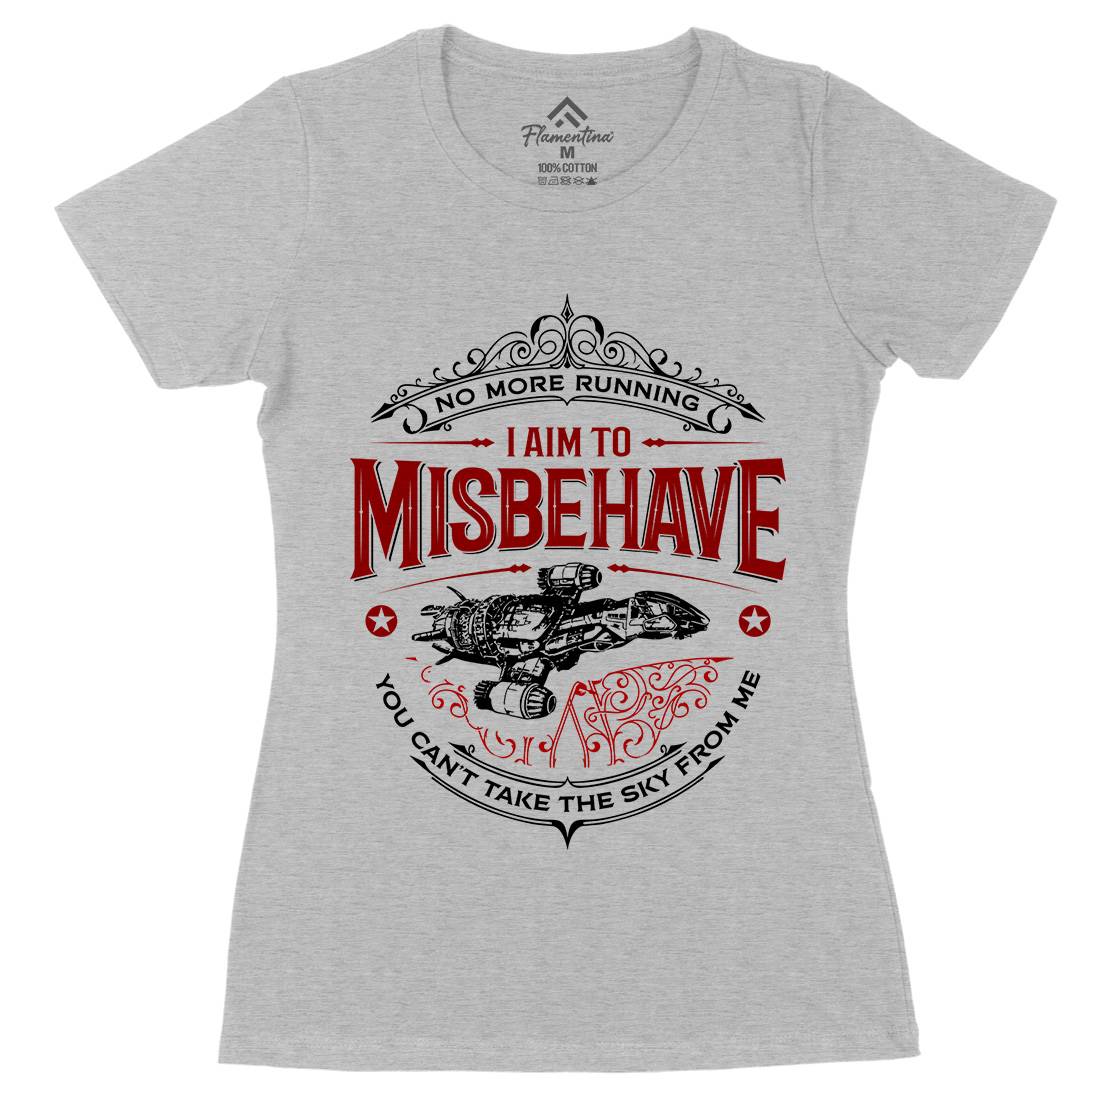 I Aim To Misbehave Womens Organic Crew Neck T-Shirt Space D435